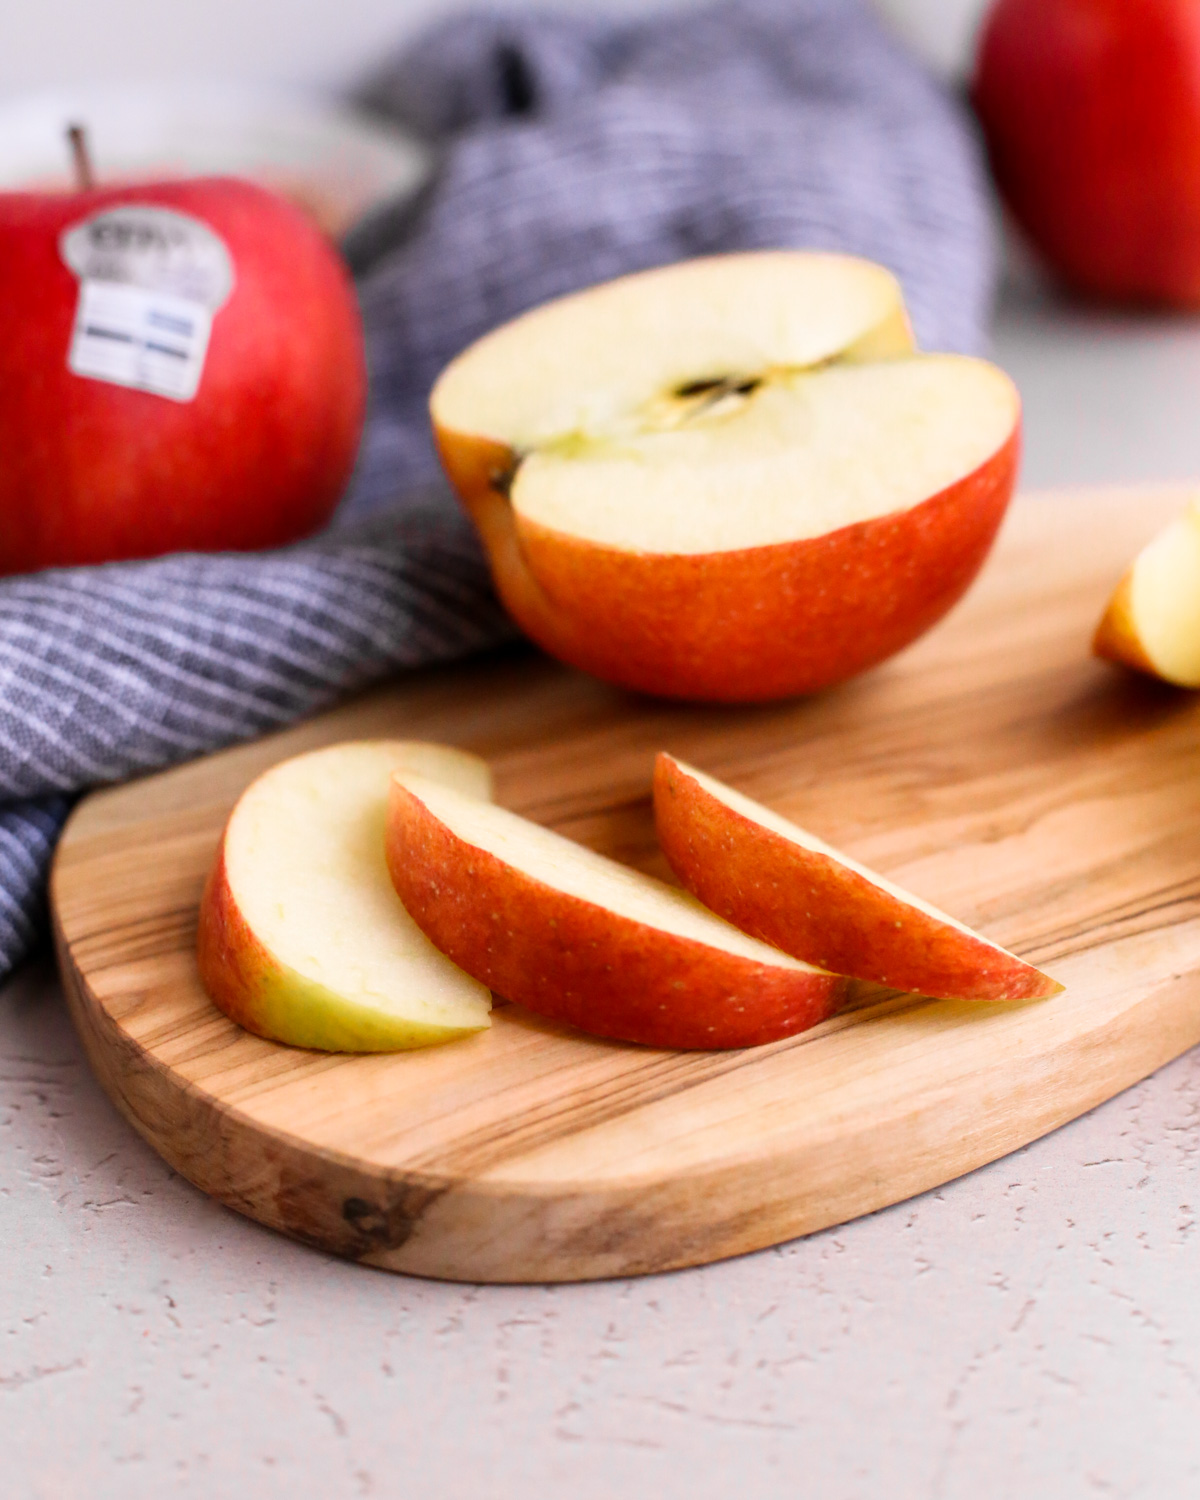 Close up view of an Envy apple sliced in half, showing a crisp white interior that stays fresh and flavorful longer, arranged on a wooden cutting board with more apples in the background